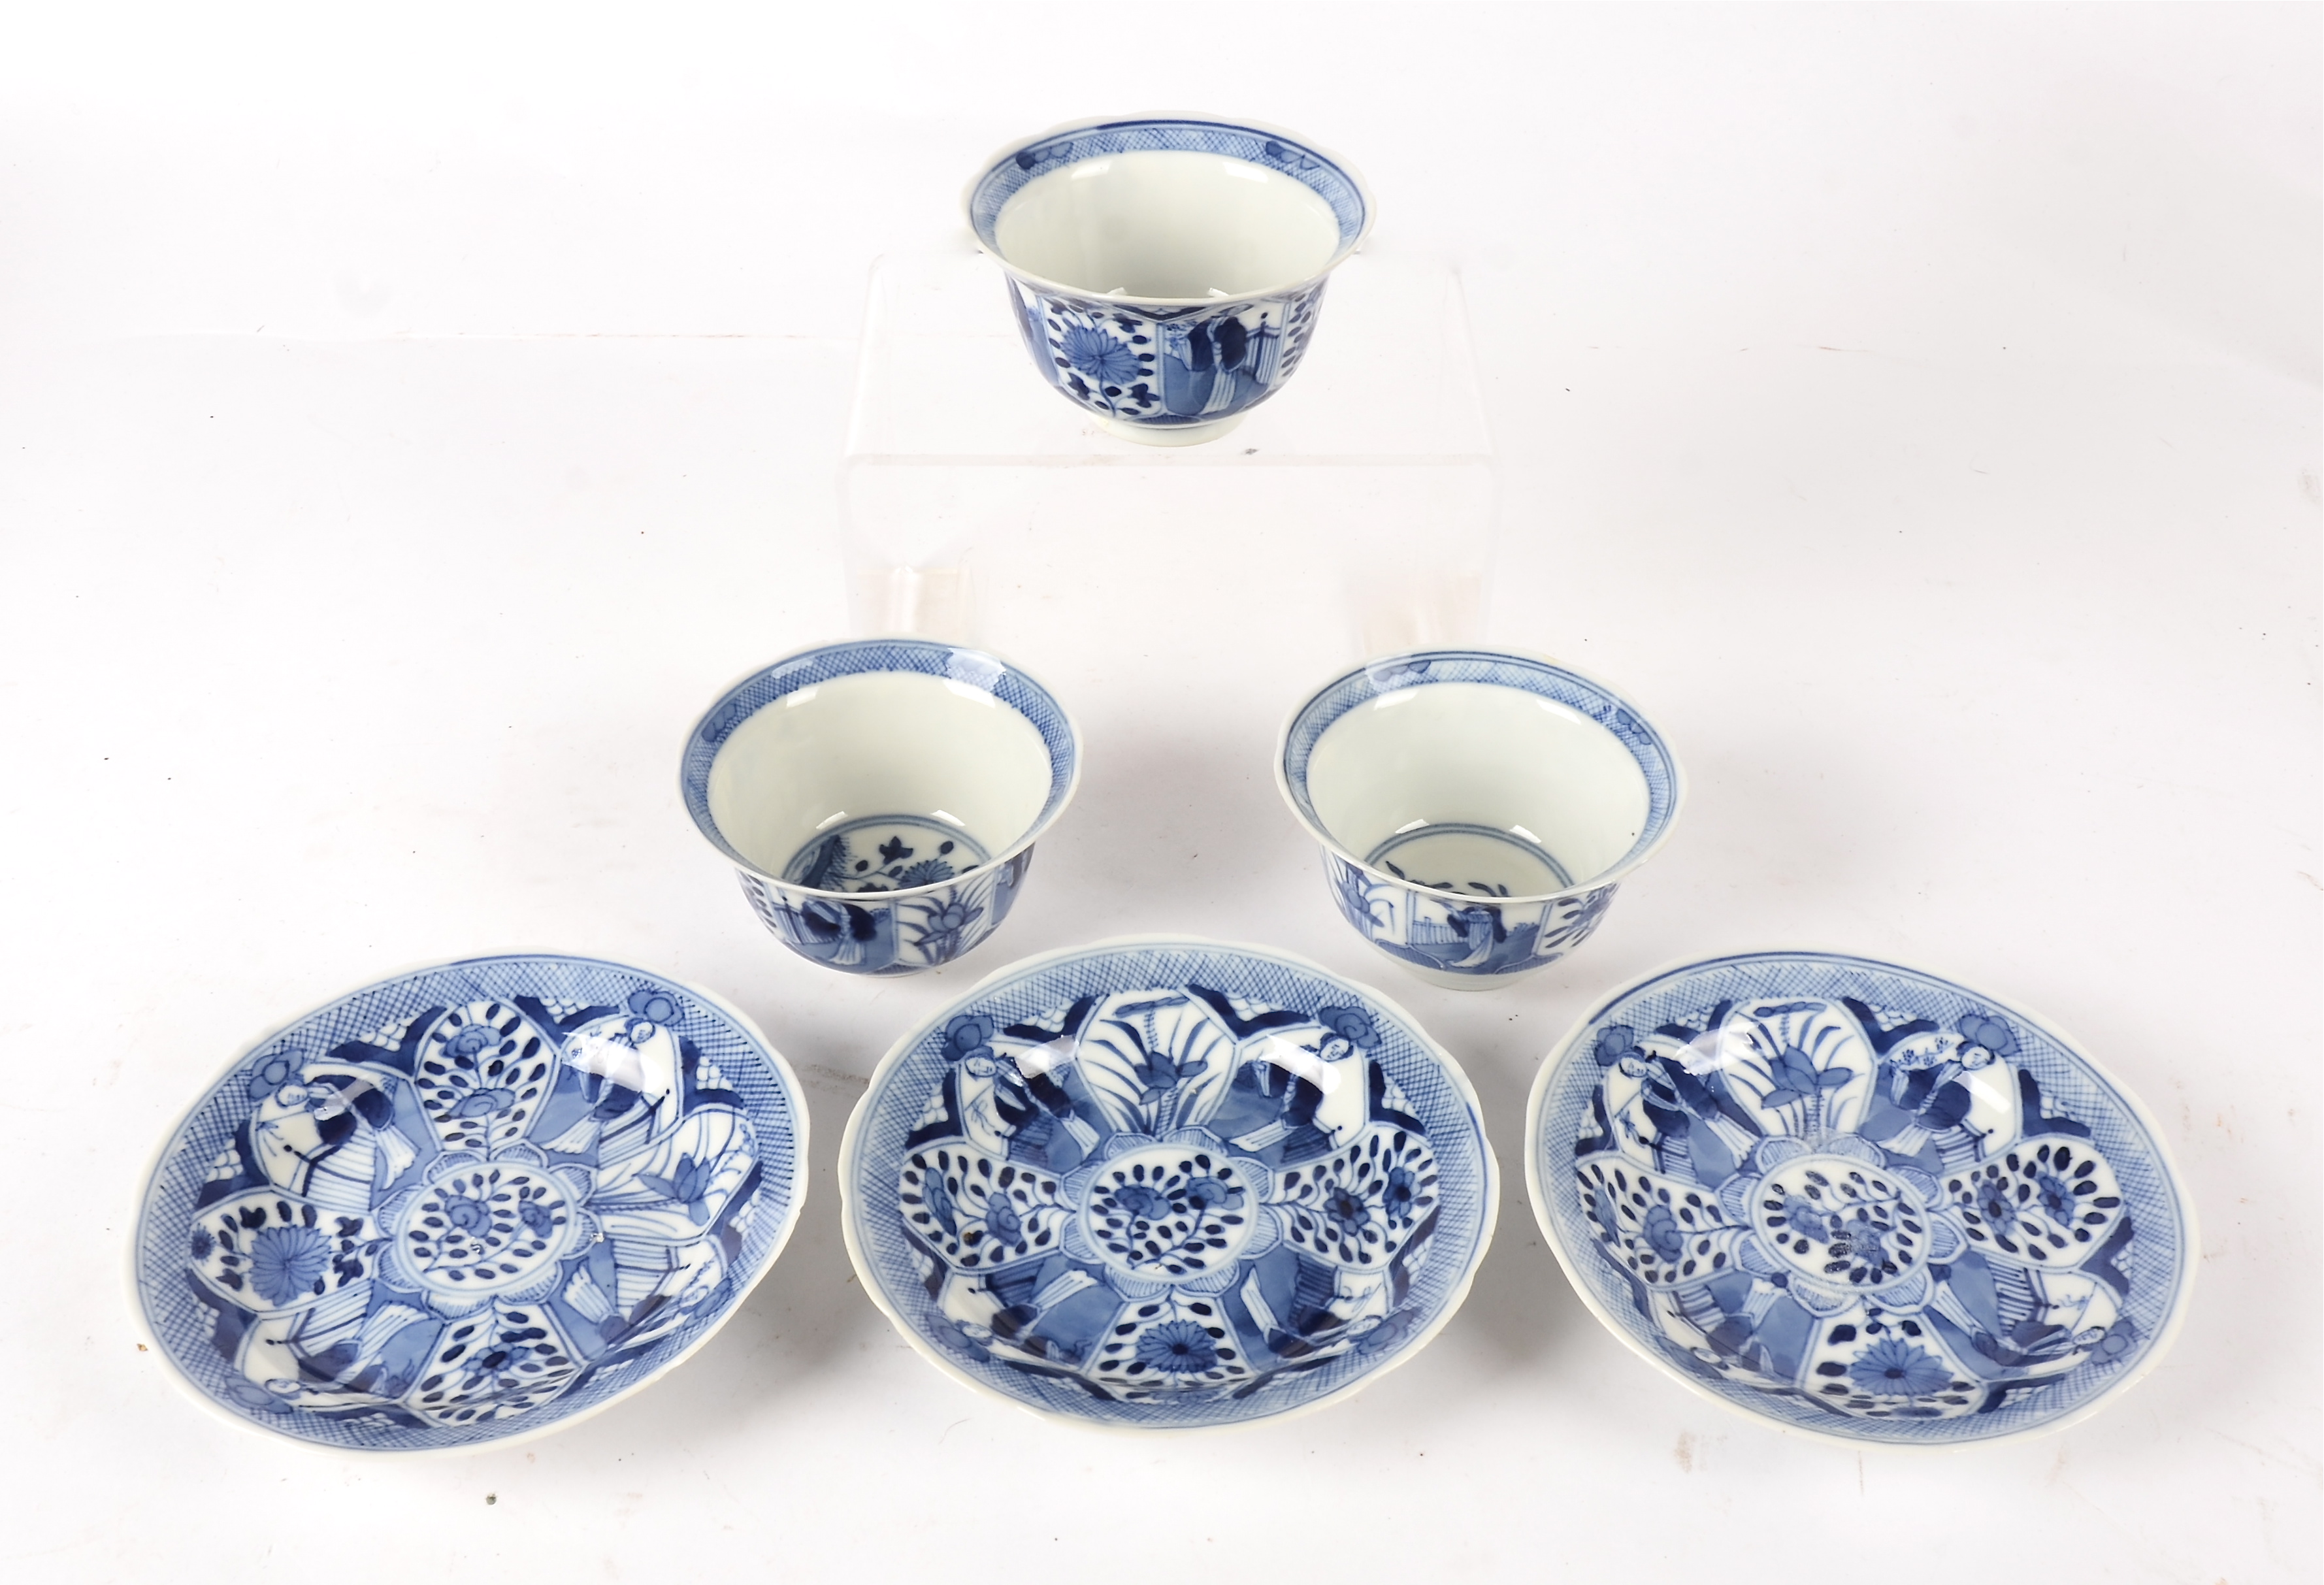 Three blue and white tea bowls and saucers, in the Kraak tradition but later, divided into